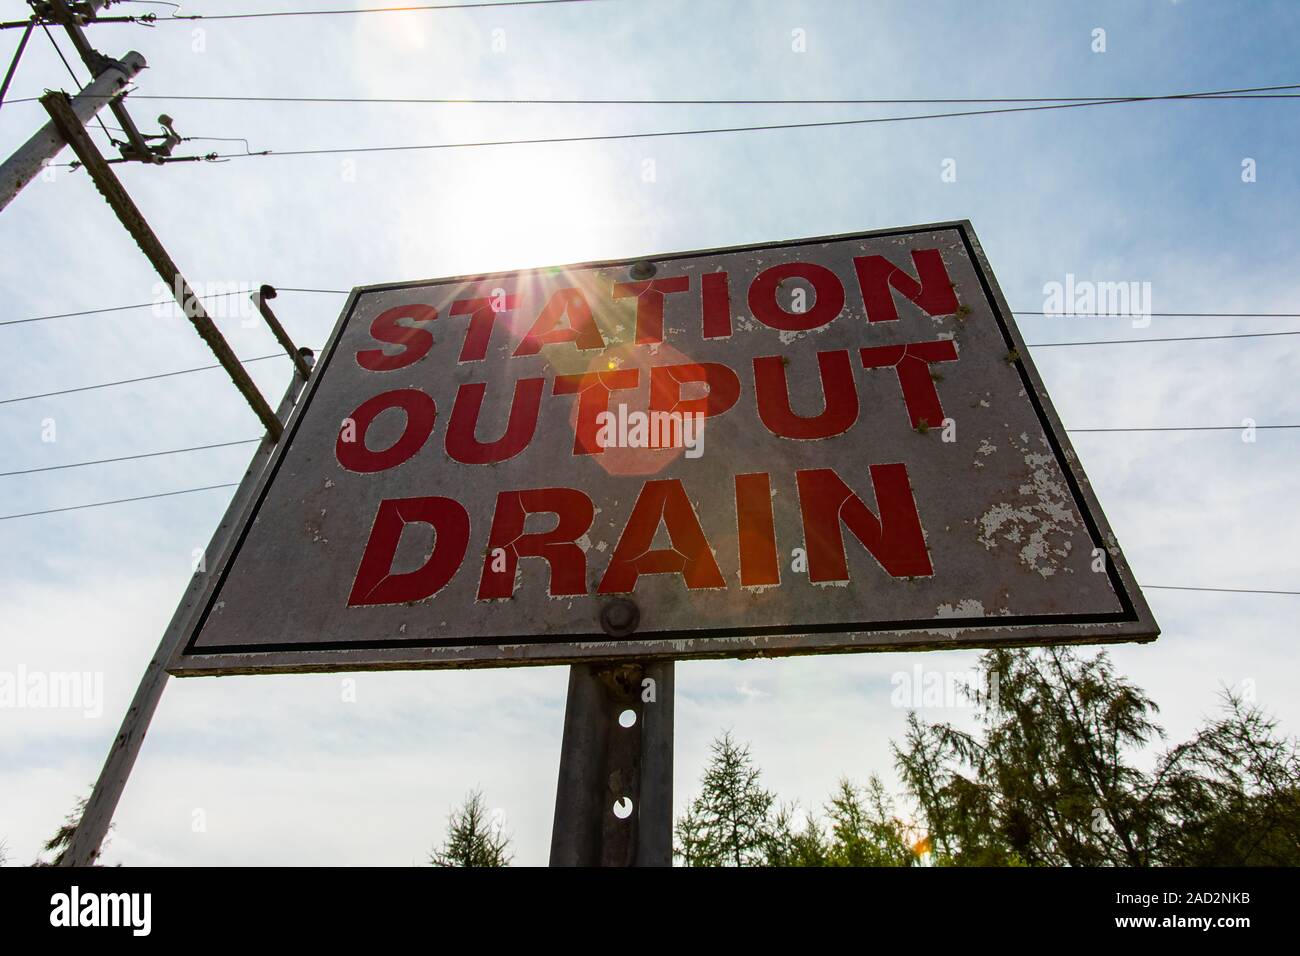 low angle view of a white and red sign against the sky, electric towers and cables, STATION, OUTPUT, DRAIN, Electrical substation Signage Stock Photo